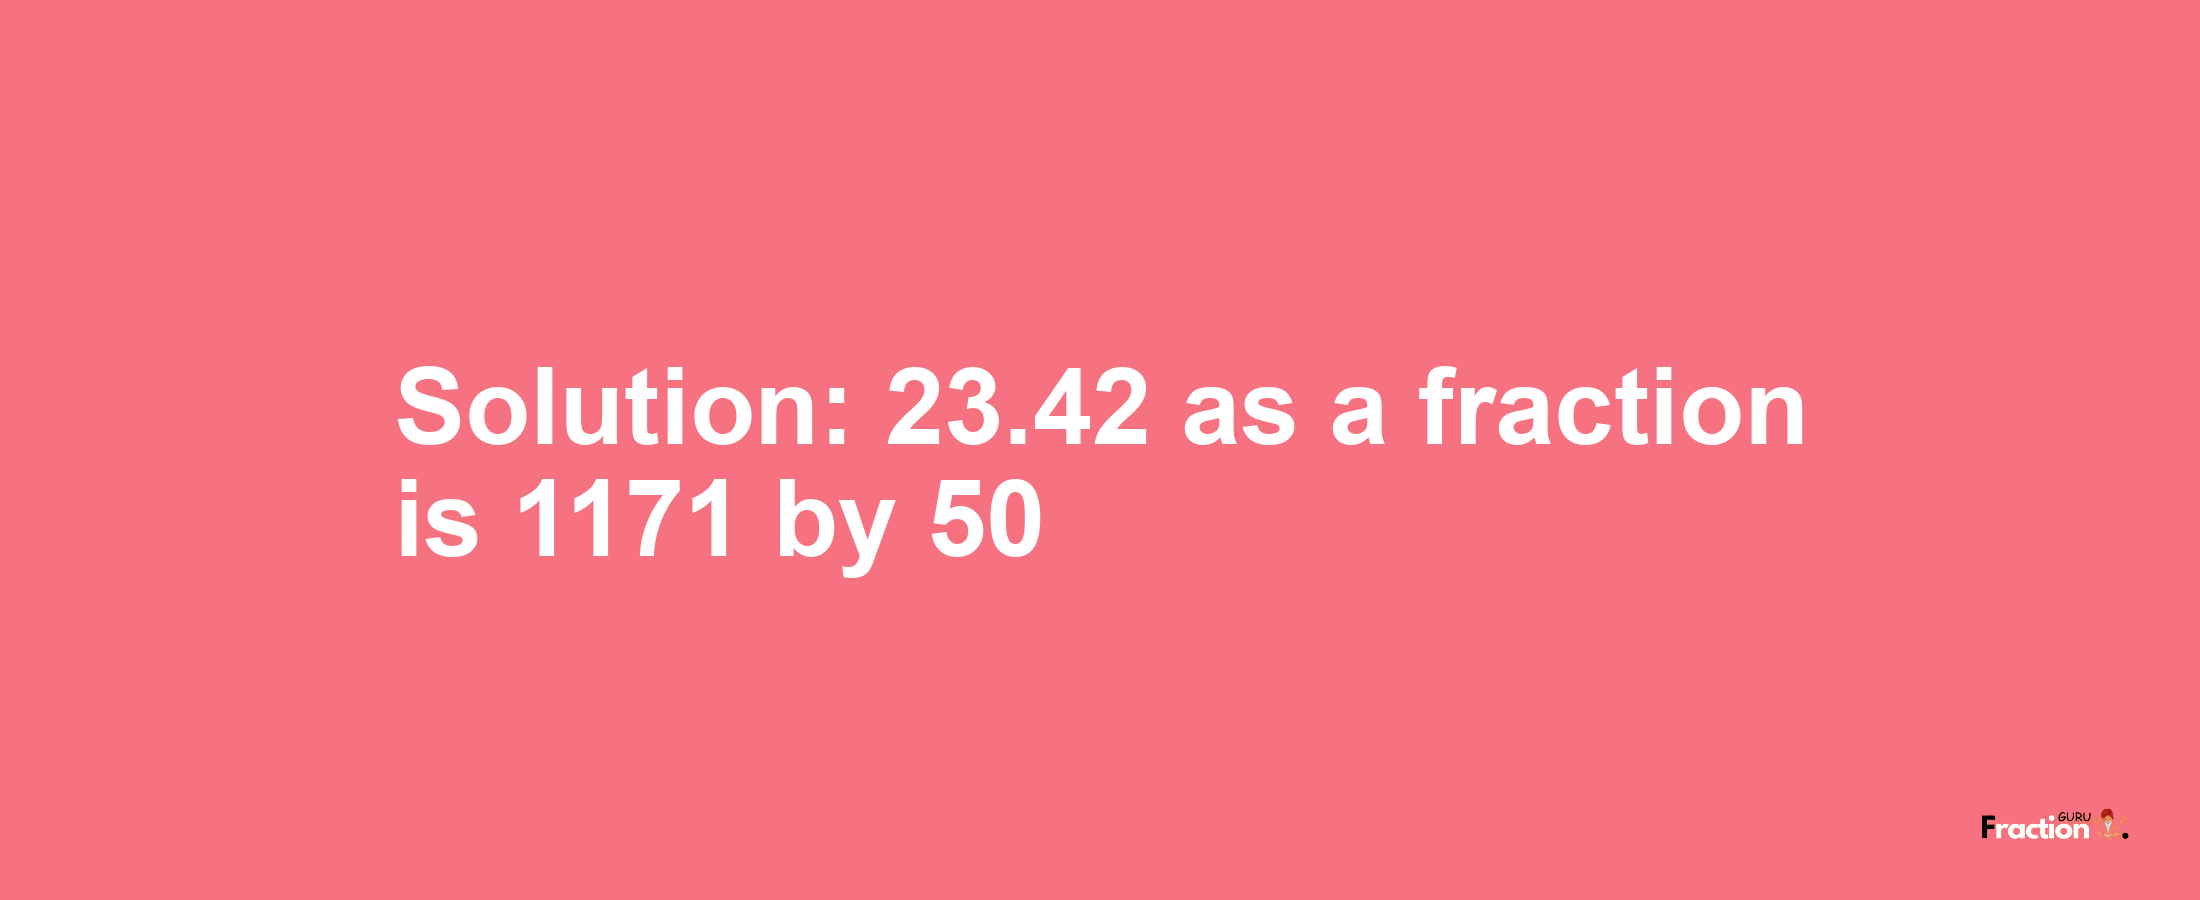 Solution:23.42 as a fraction is 1171/50